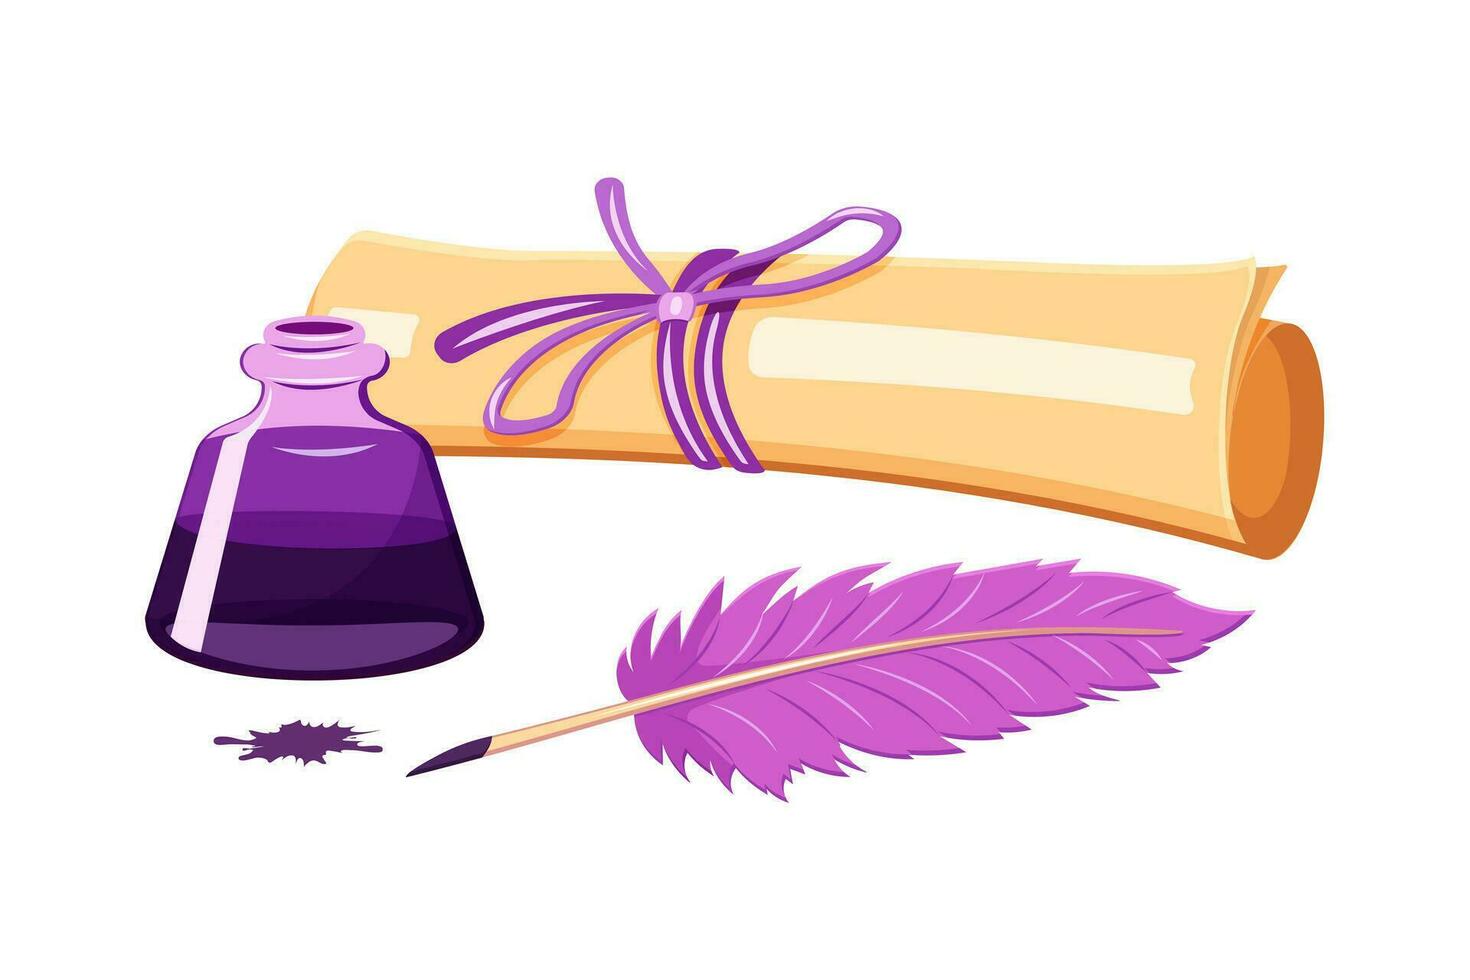 Scroll of old paper with inkwell and feather. Vector illustration on the theme of poetry. Ancient writing materials